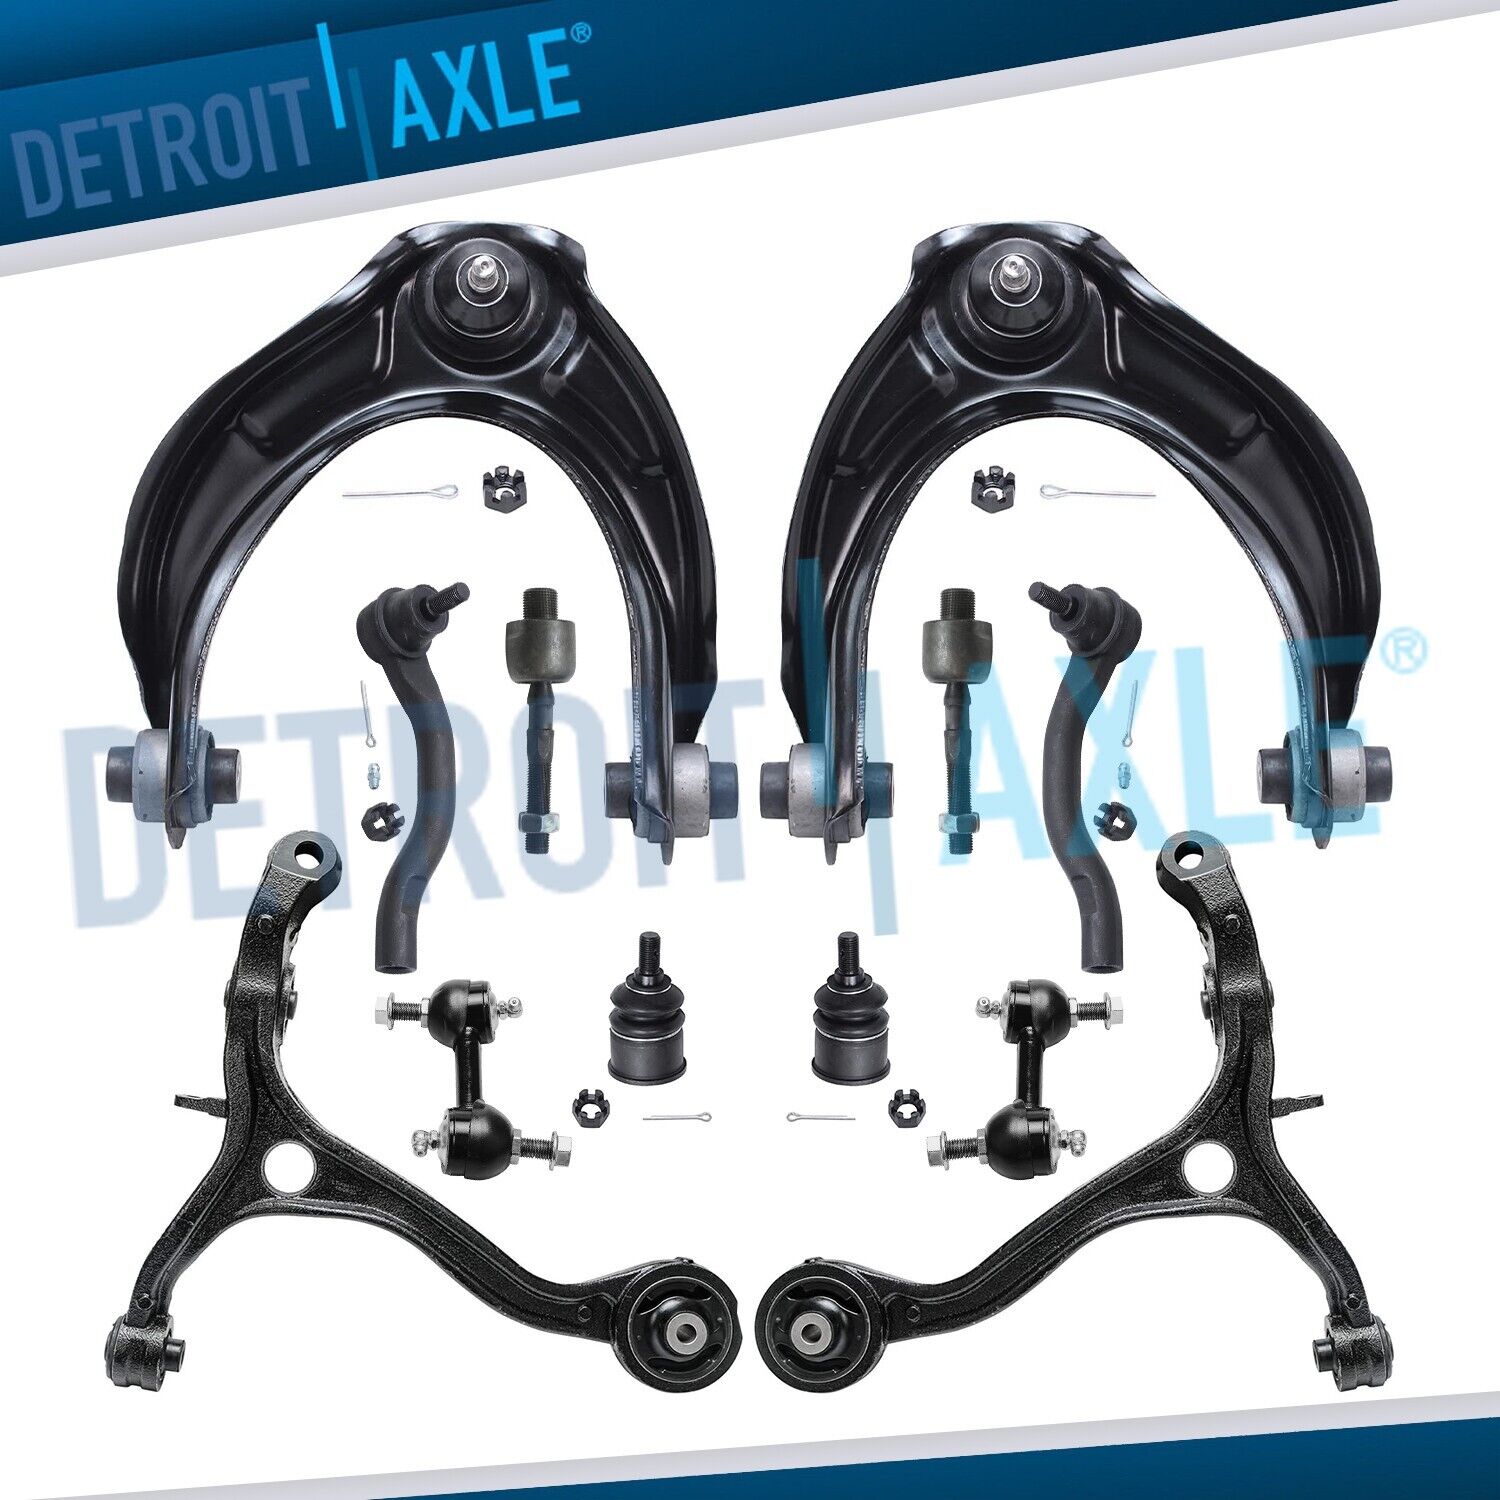 12pc Front Upper & Lower Control Arms Suspension Kit for 2008-2012 Honda Accord